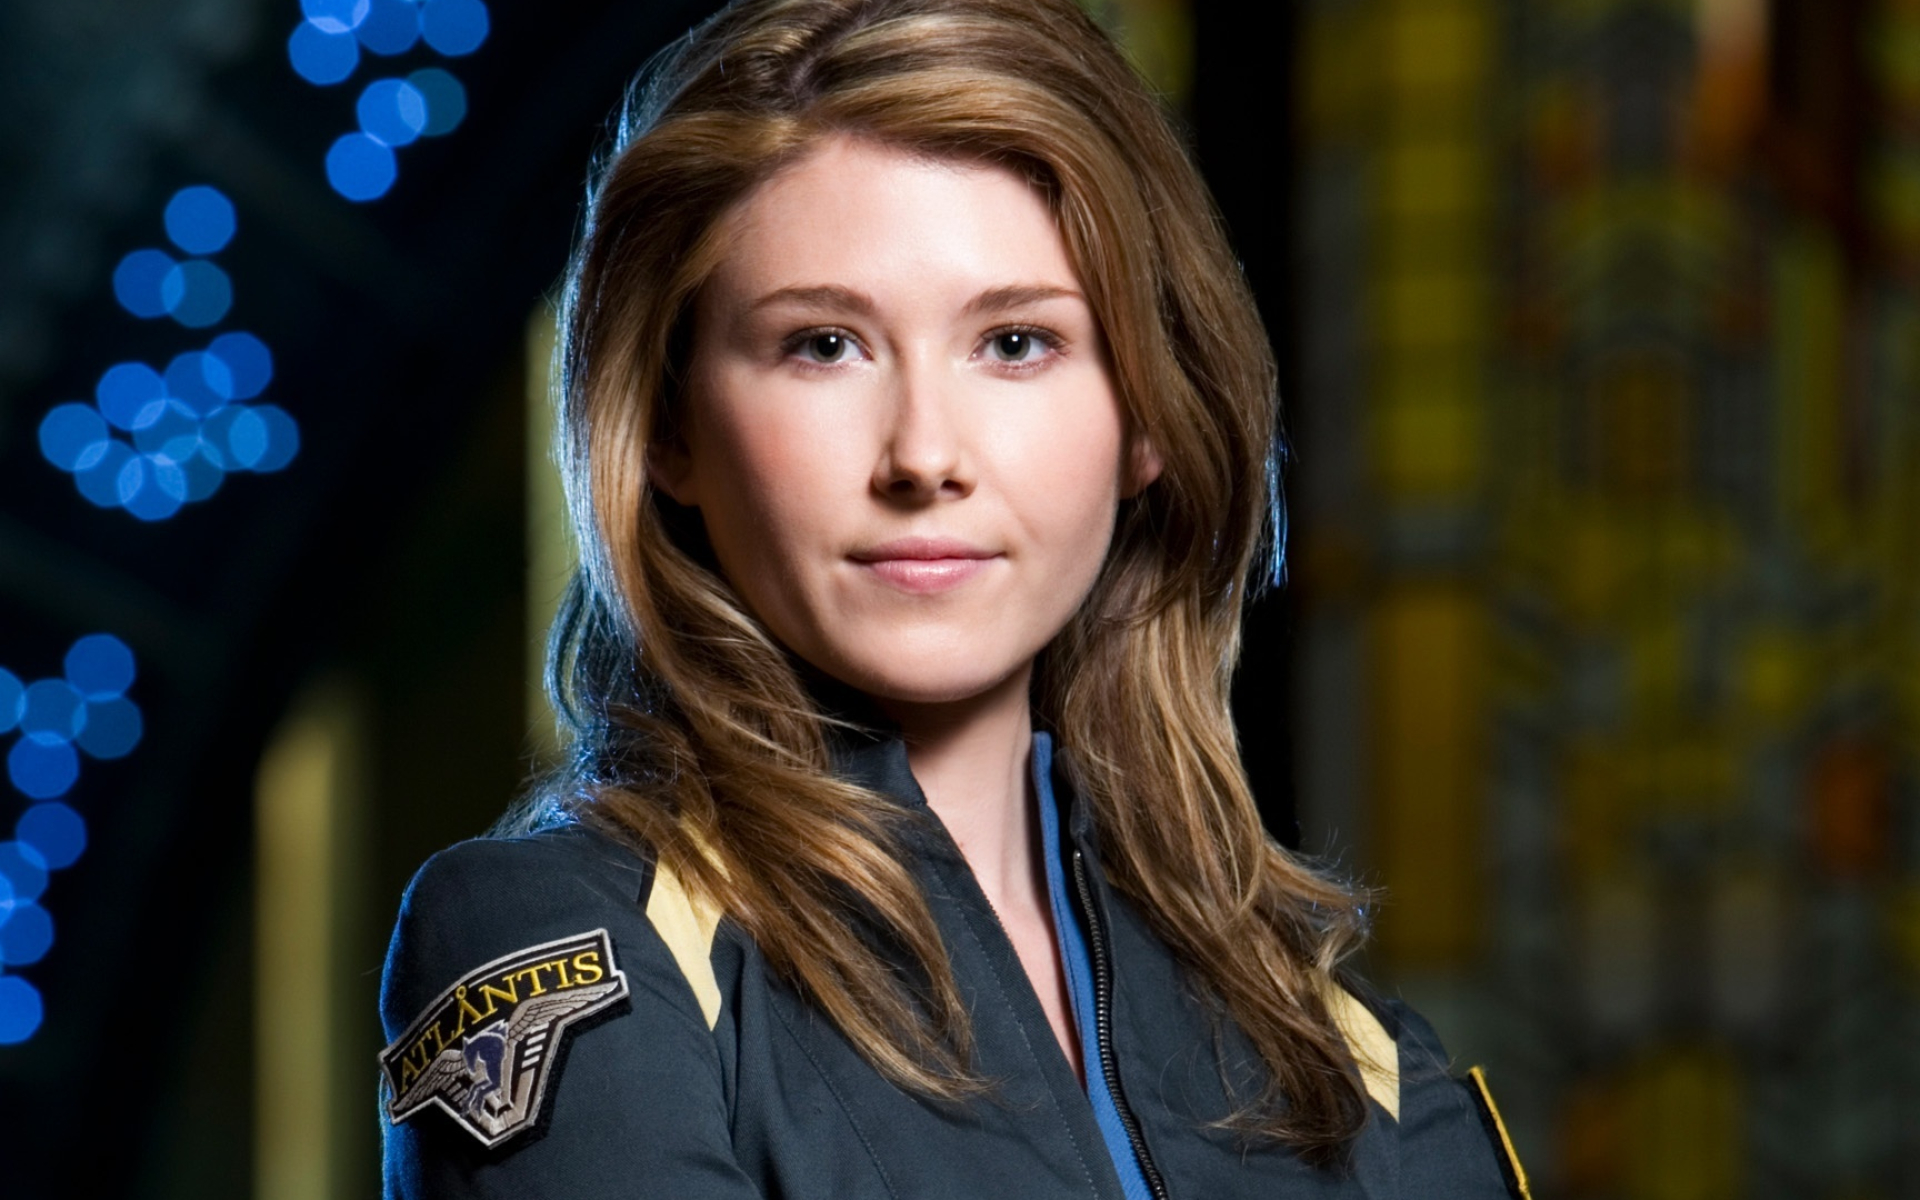 Jewel Staite wallpapers, Free download, High-quality images, Variety, 1920x1200 HD Desktop